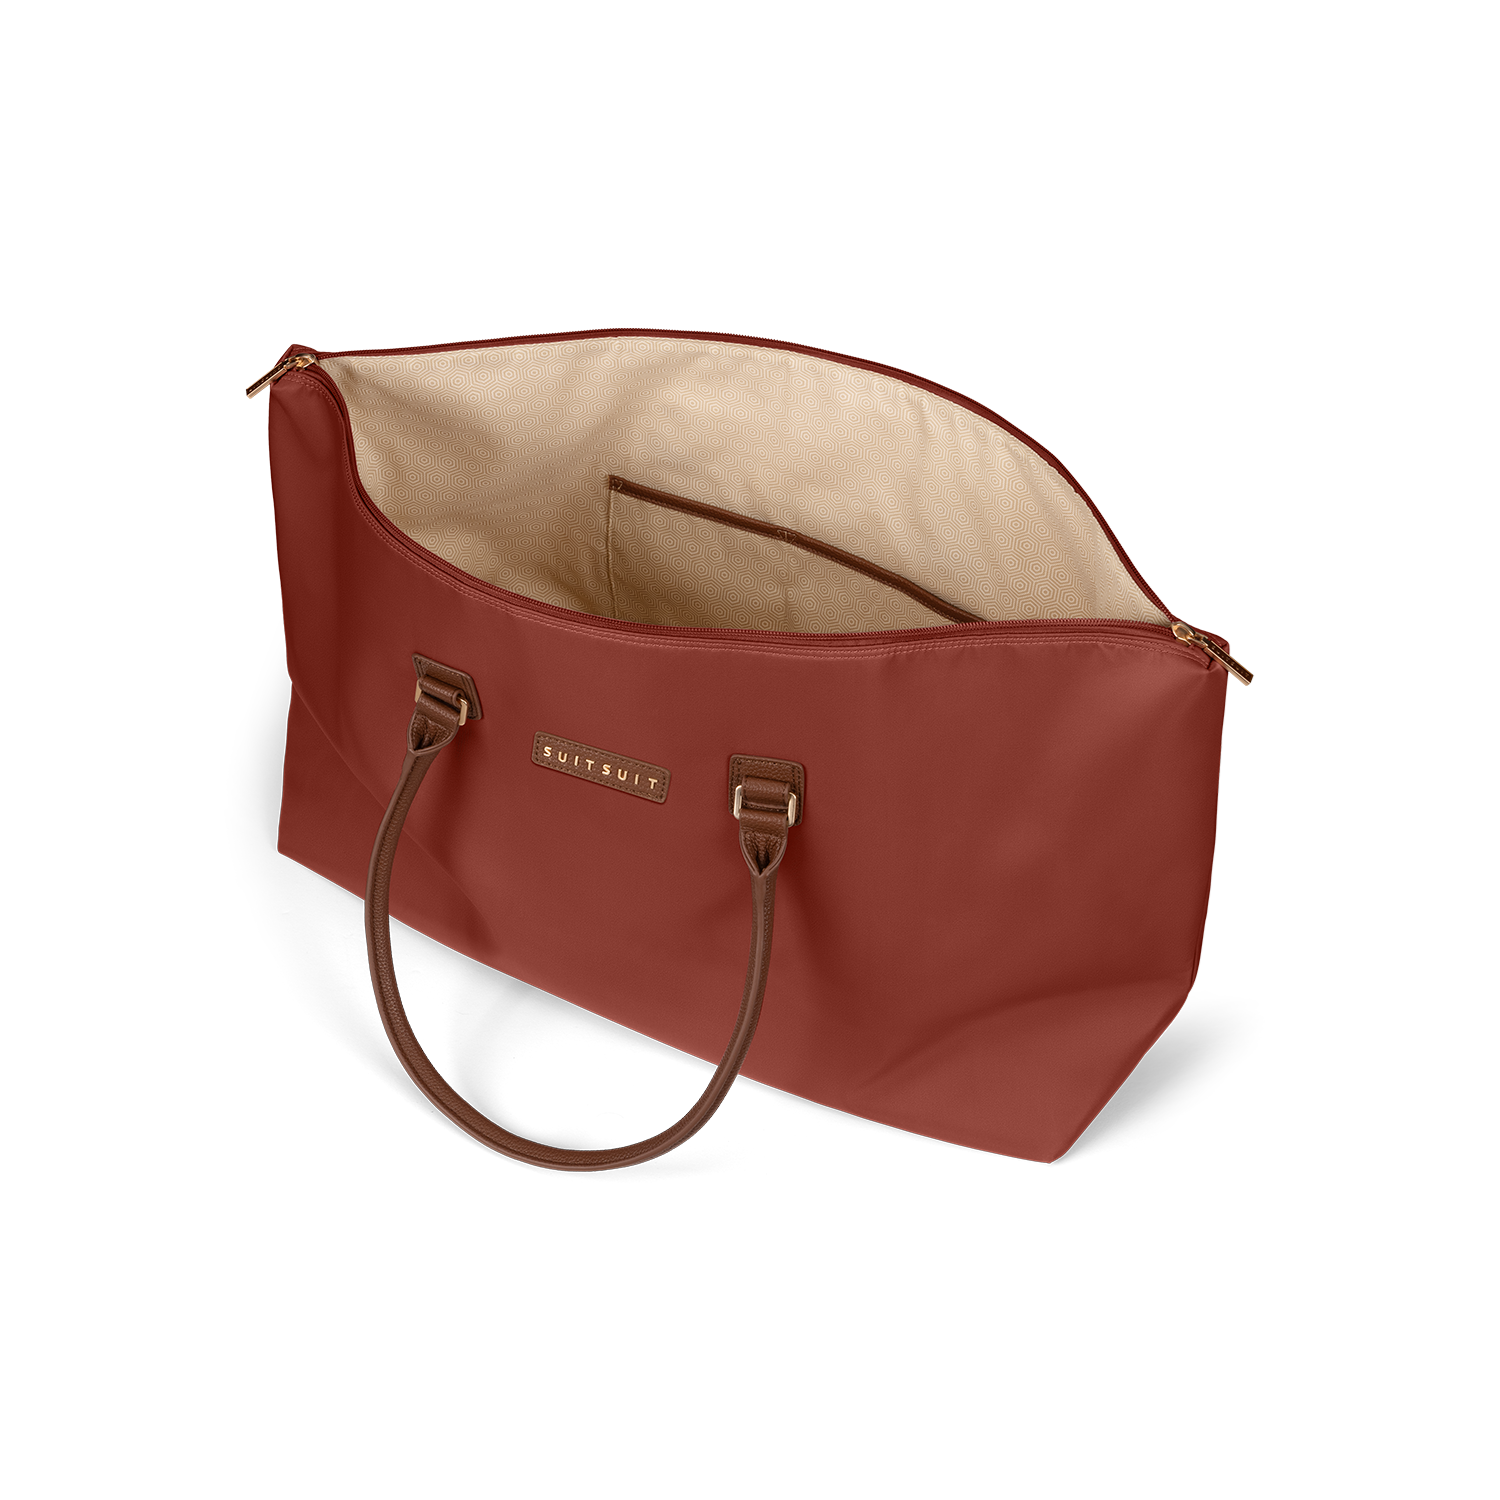 Fab Seventies - Red Ochre - Travel Tote